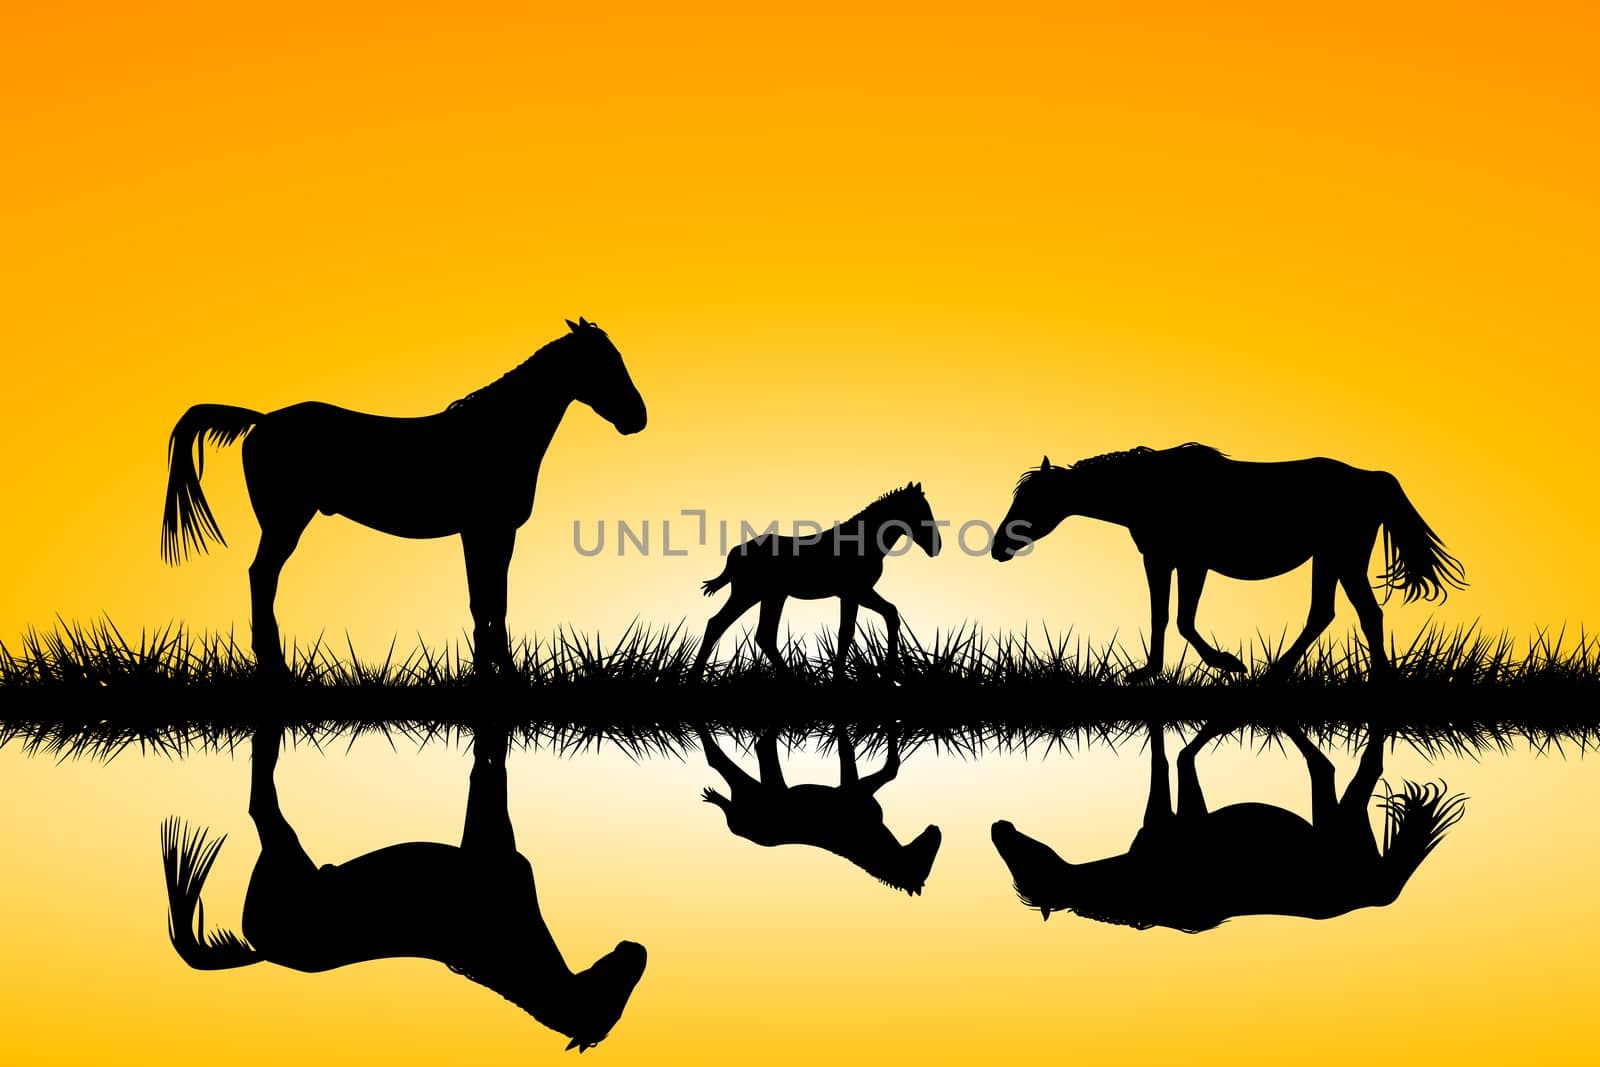 Countryside horses family silhouettes in wild nature landscape